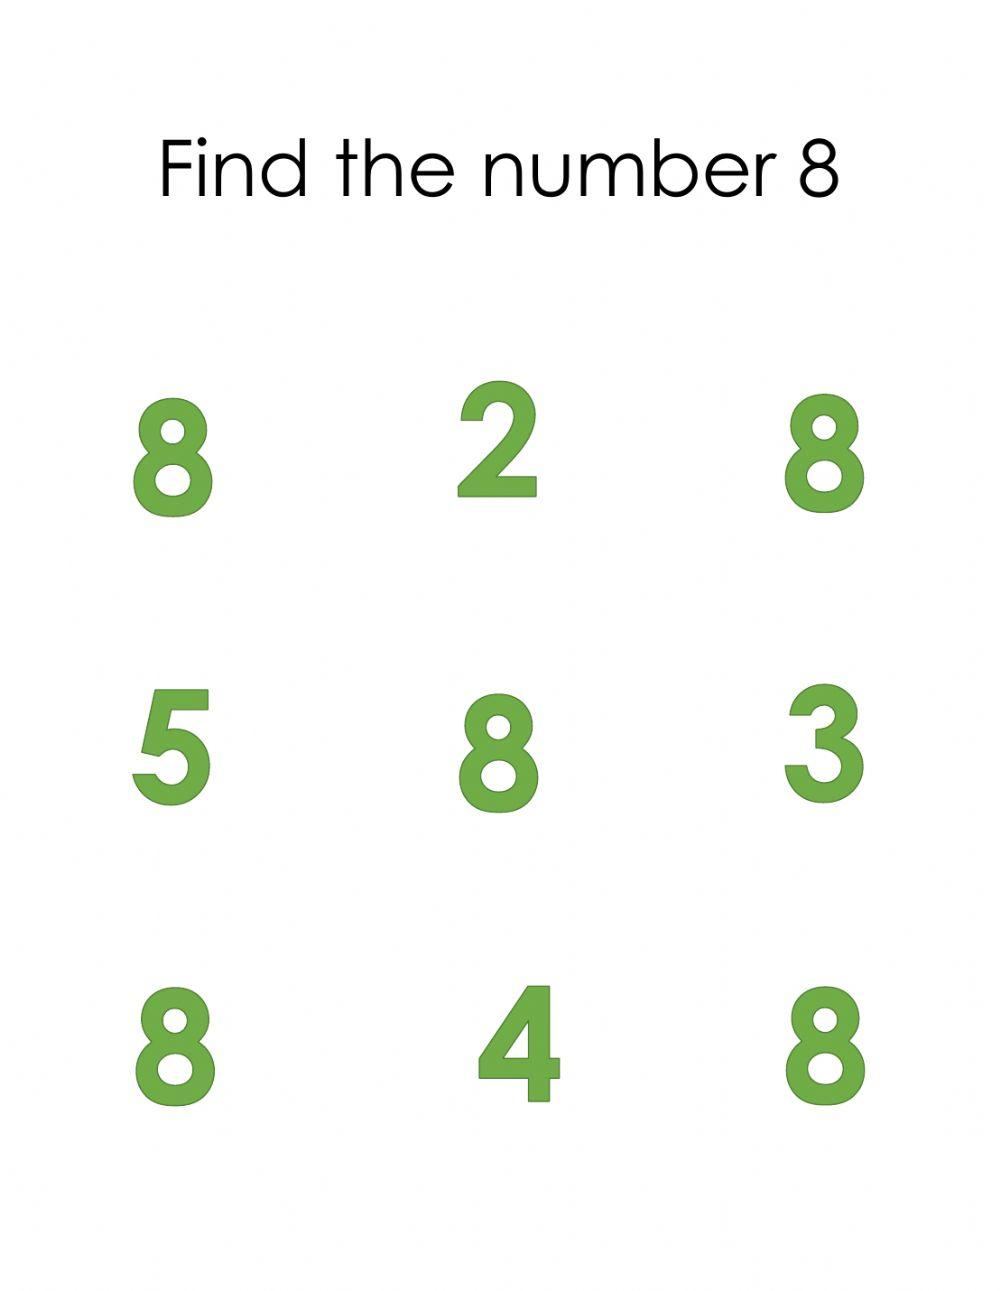 Finding number 8